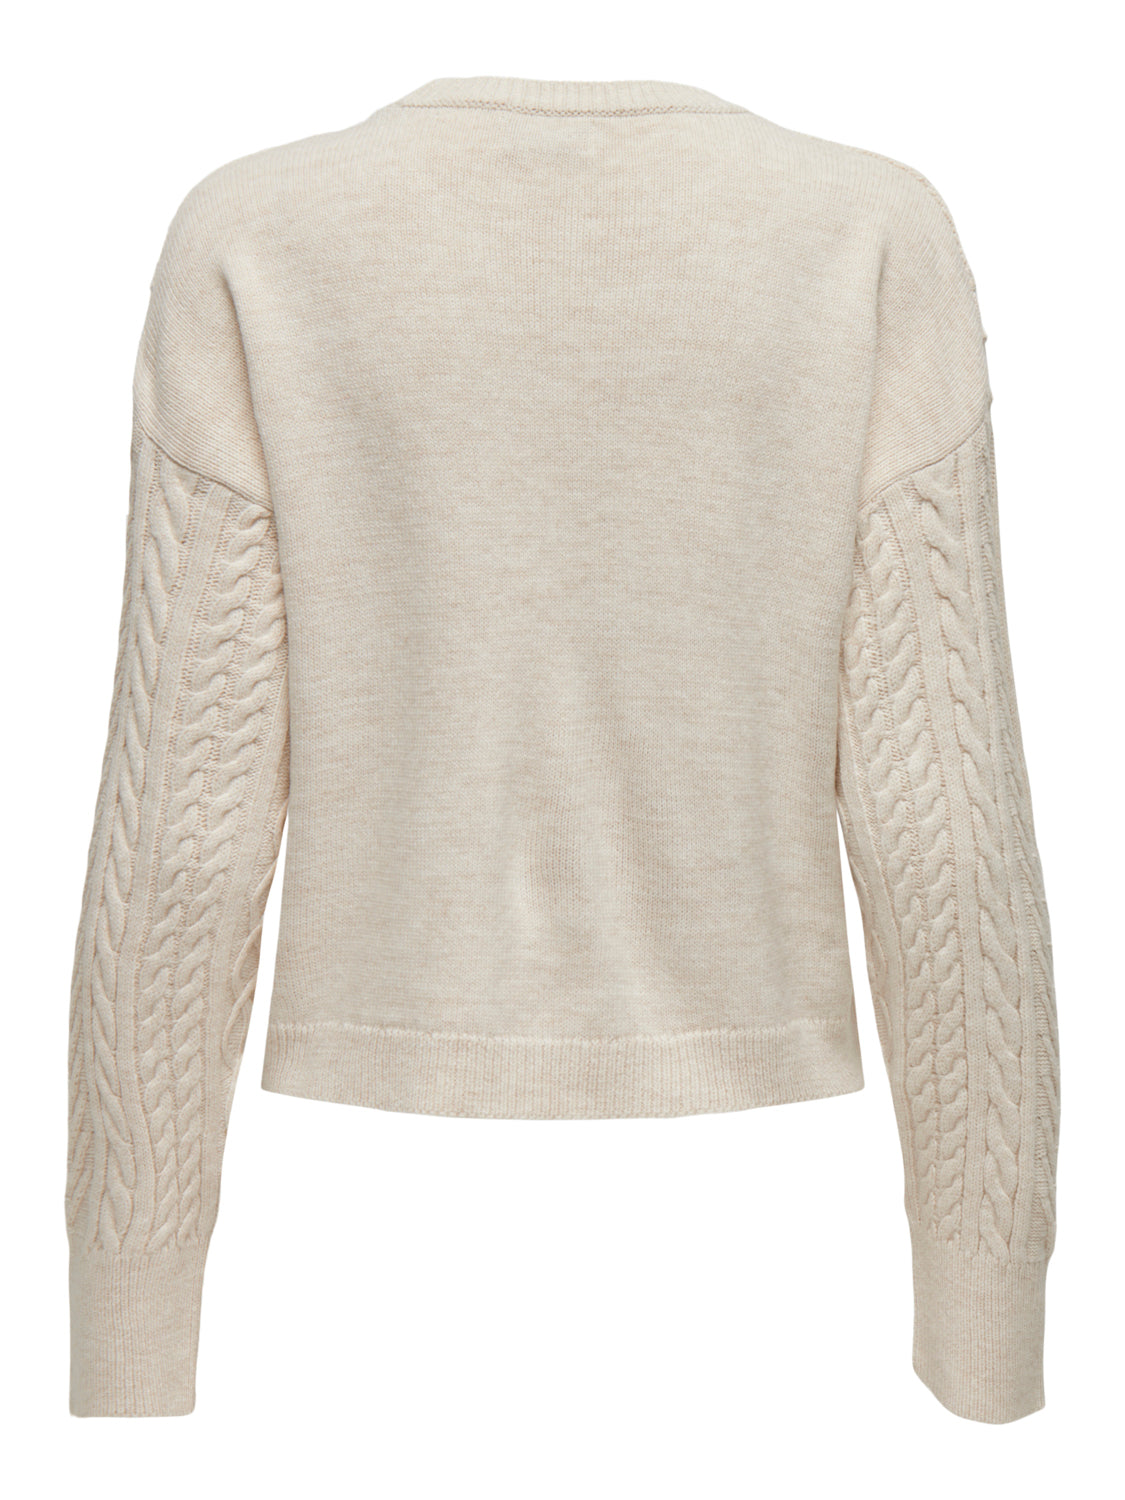 ONLSOFIE Pullover - Pumice Stone